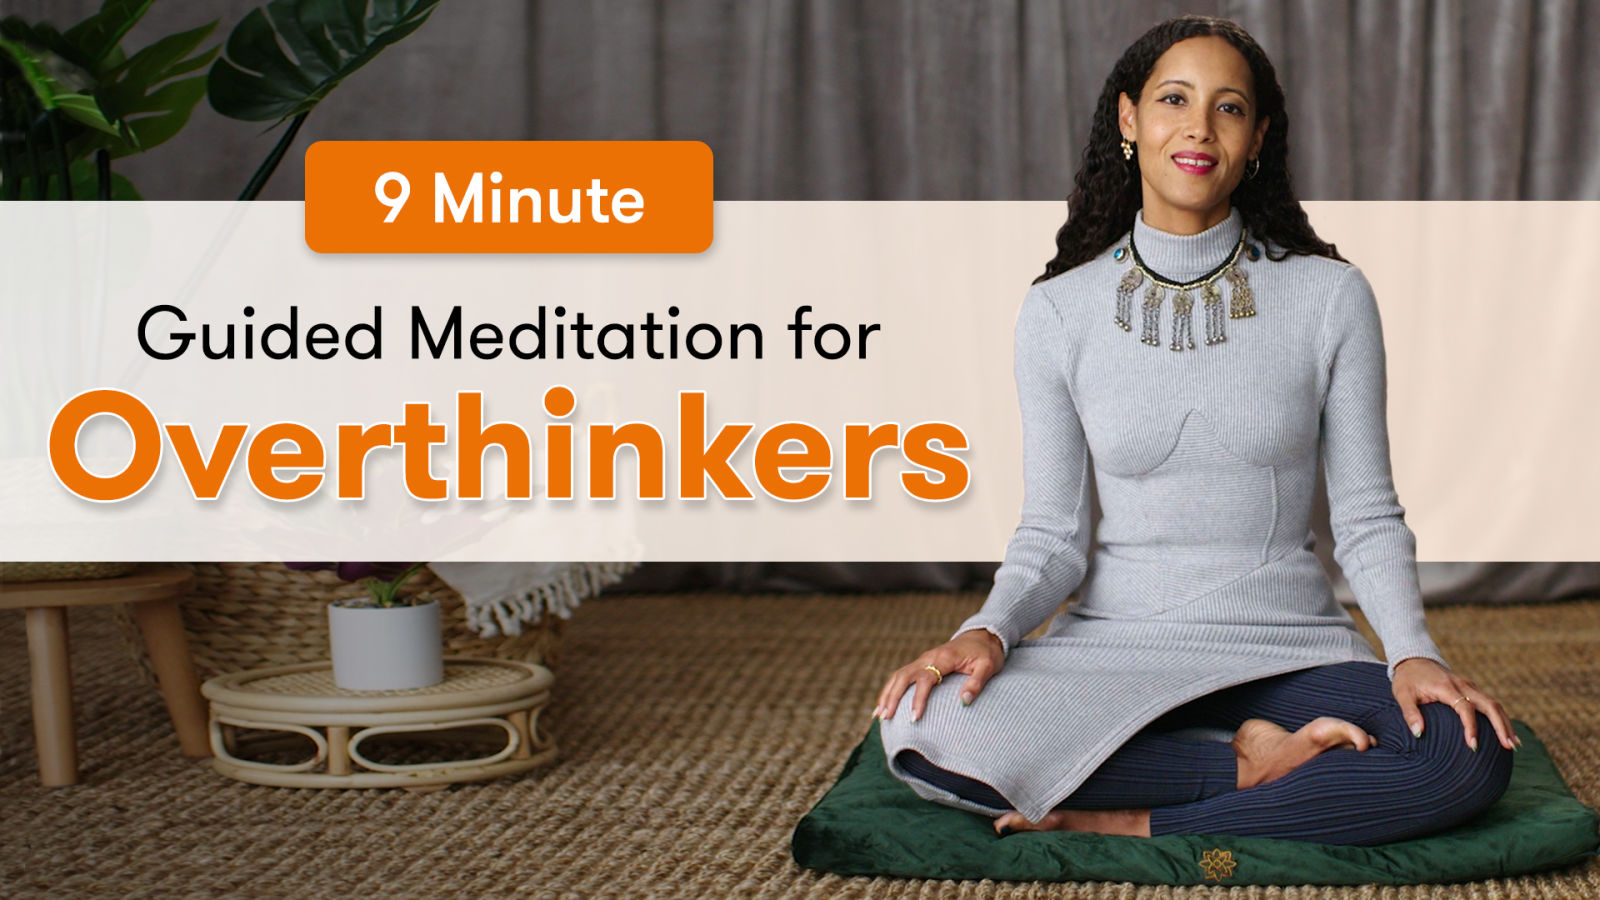 9 Minutes Of Guided Meditation For Overthinkers